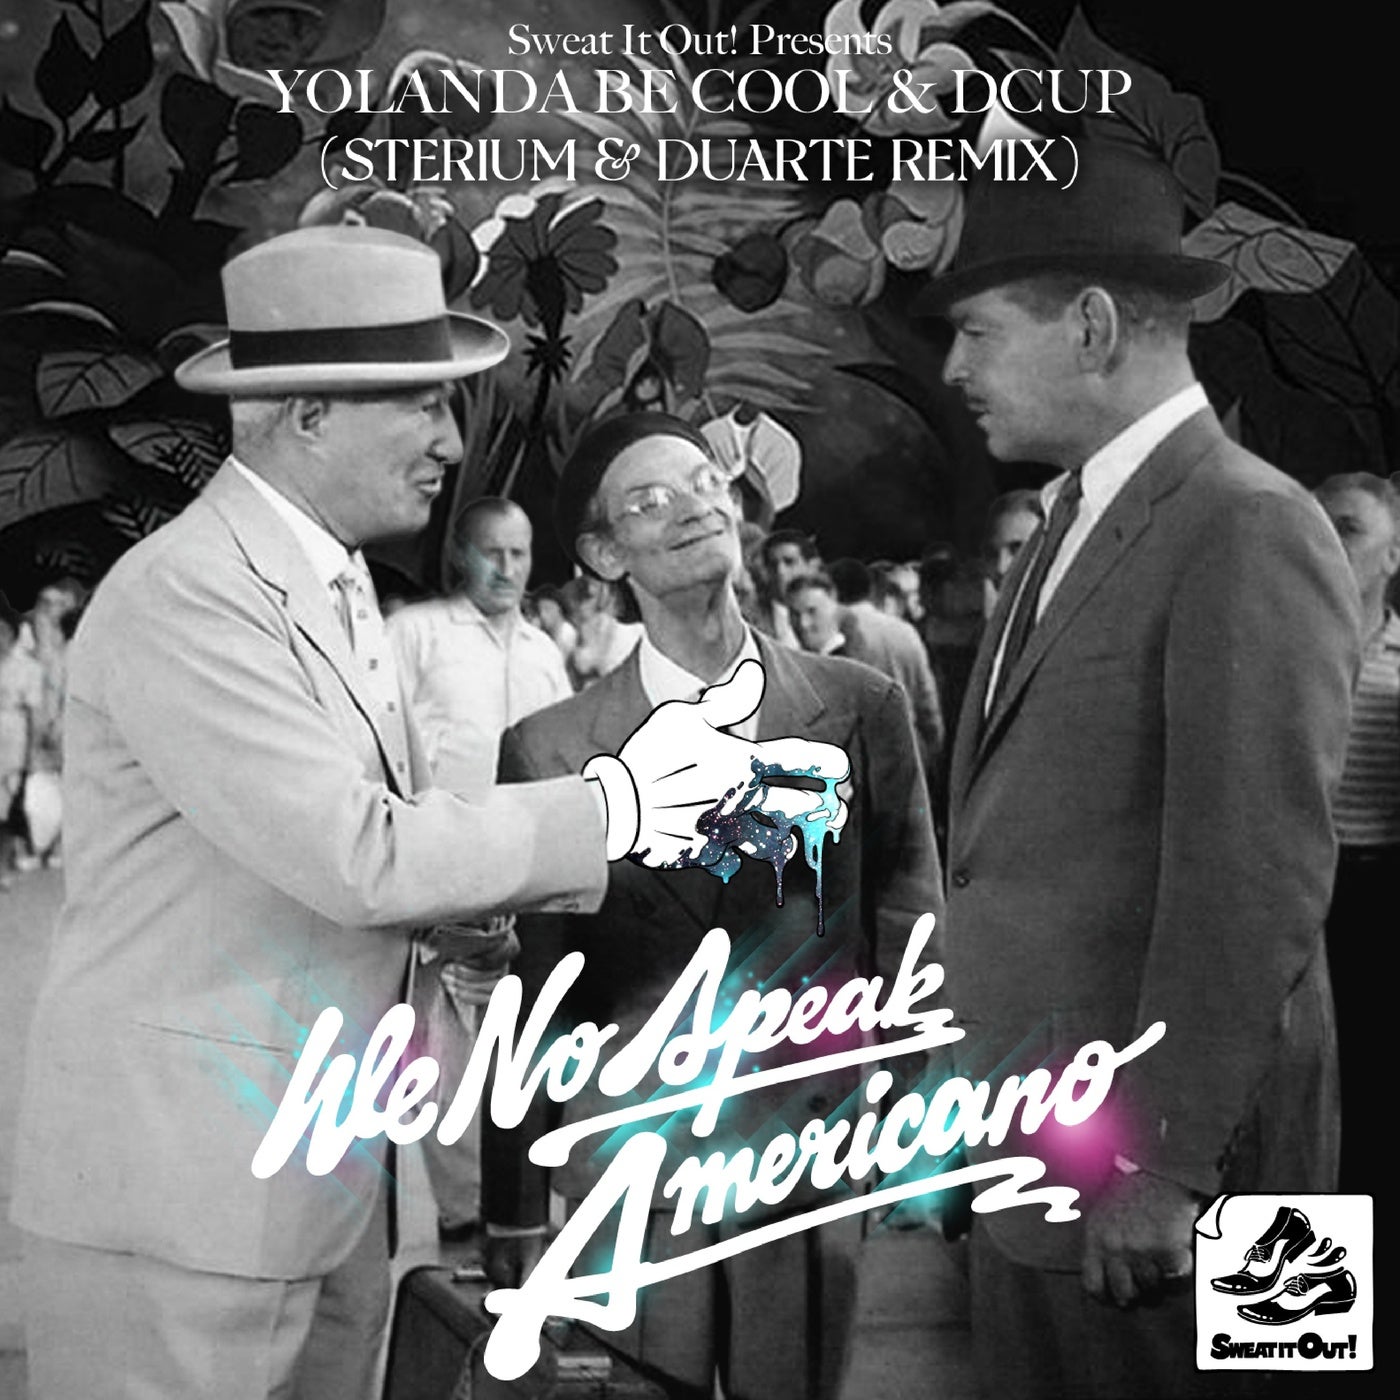 image cover: Yolanda Be Cool, Dcup - We No Speak Americano ((Sterium & Duarte Remix) [Extended Mix]) on Sweat It Out